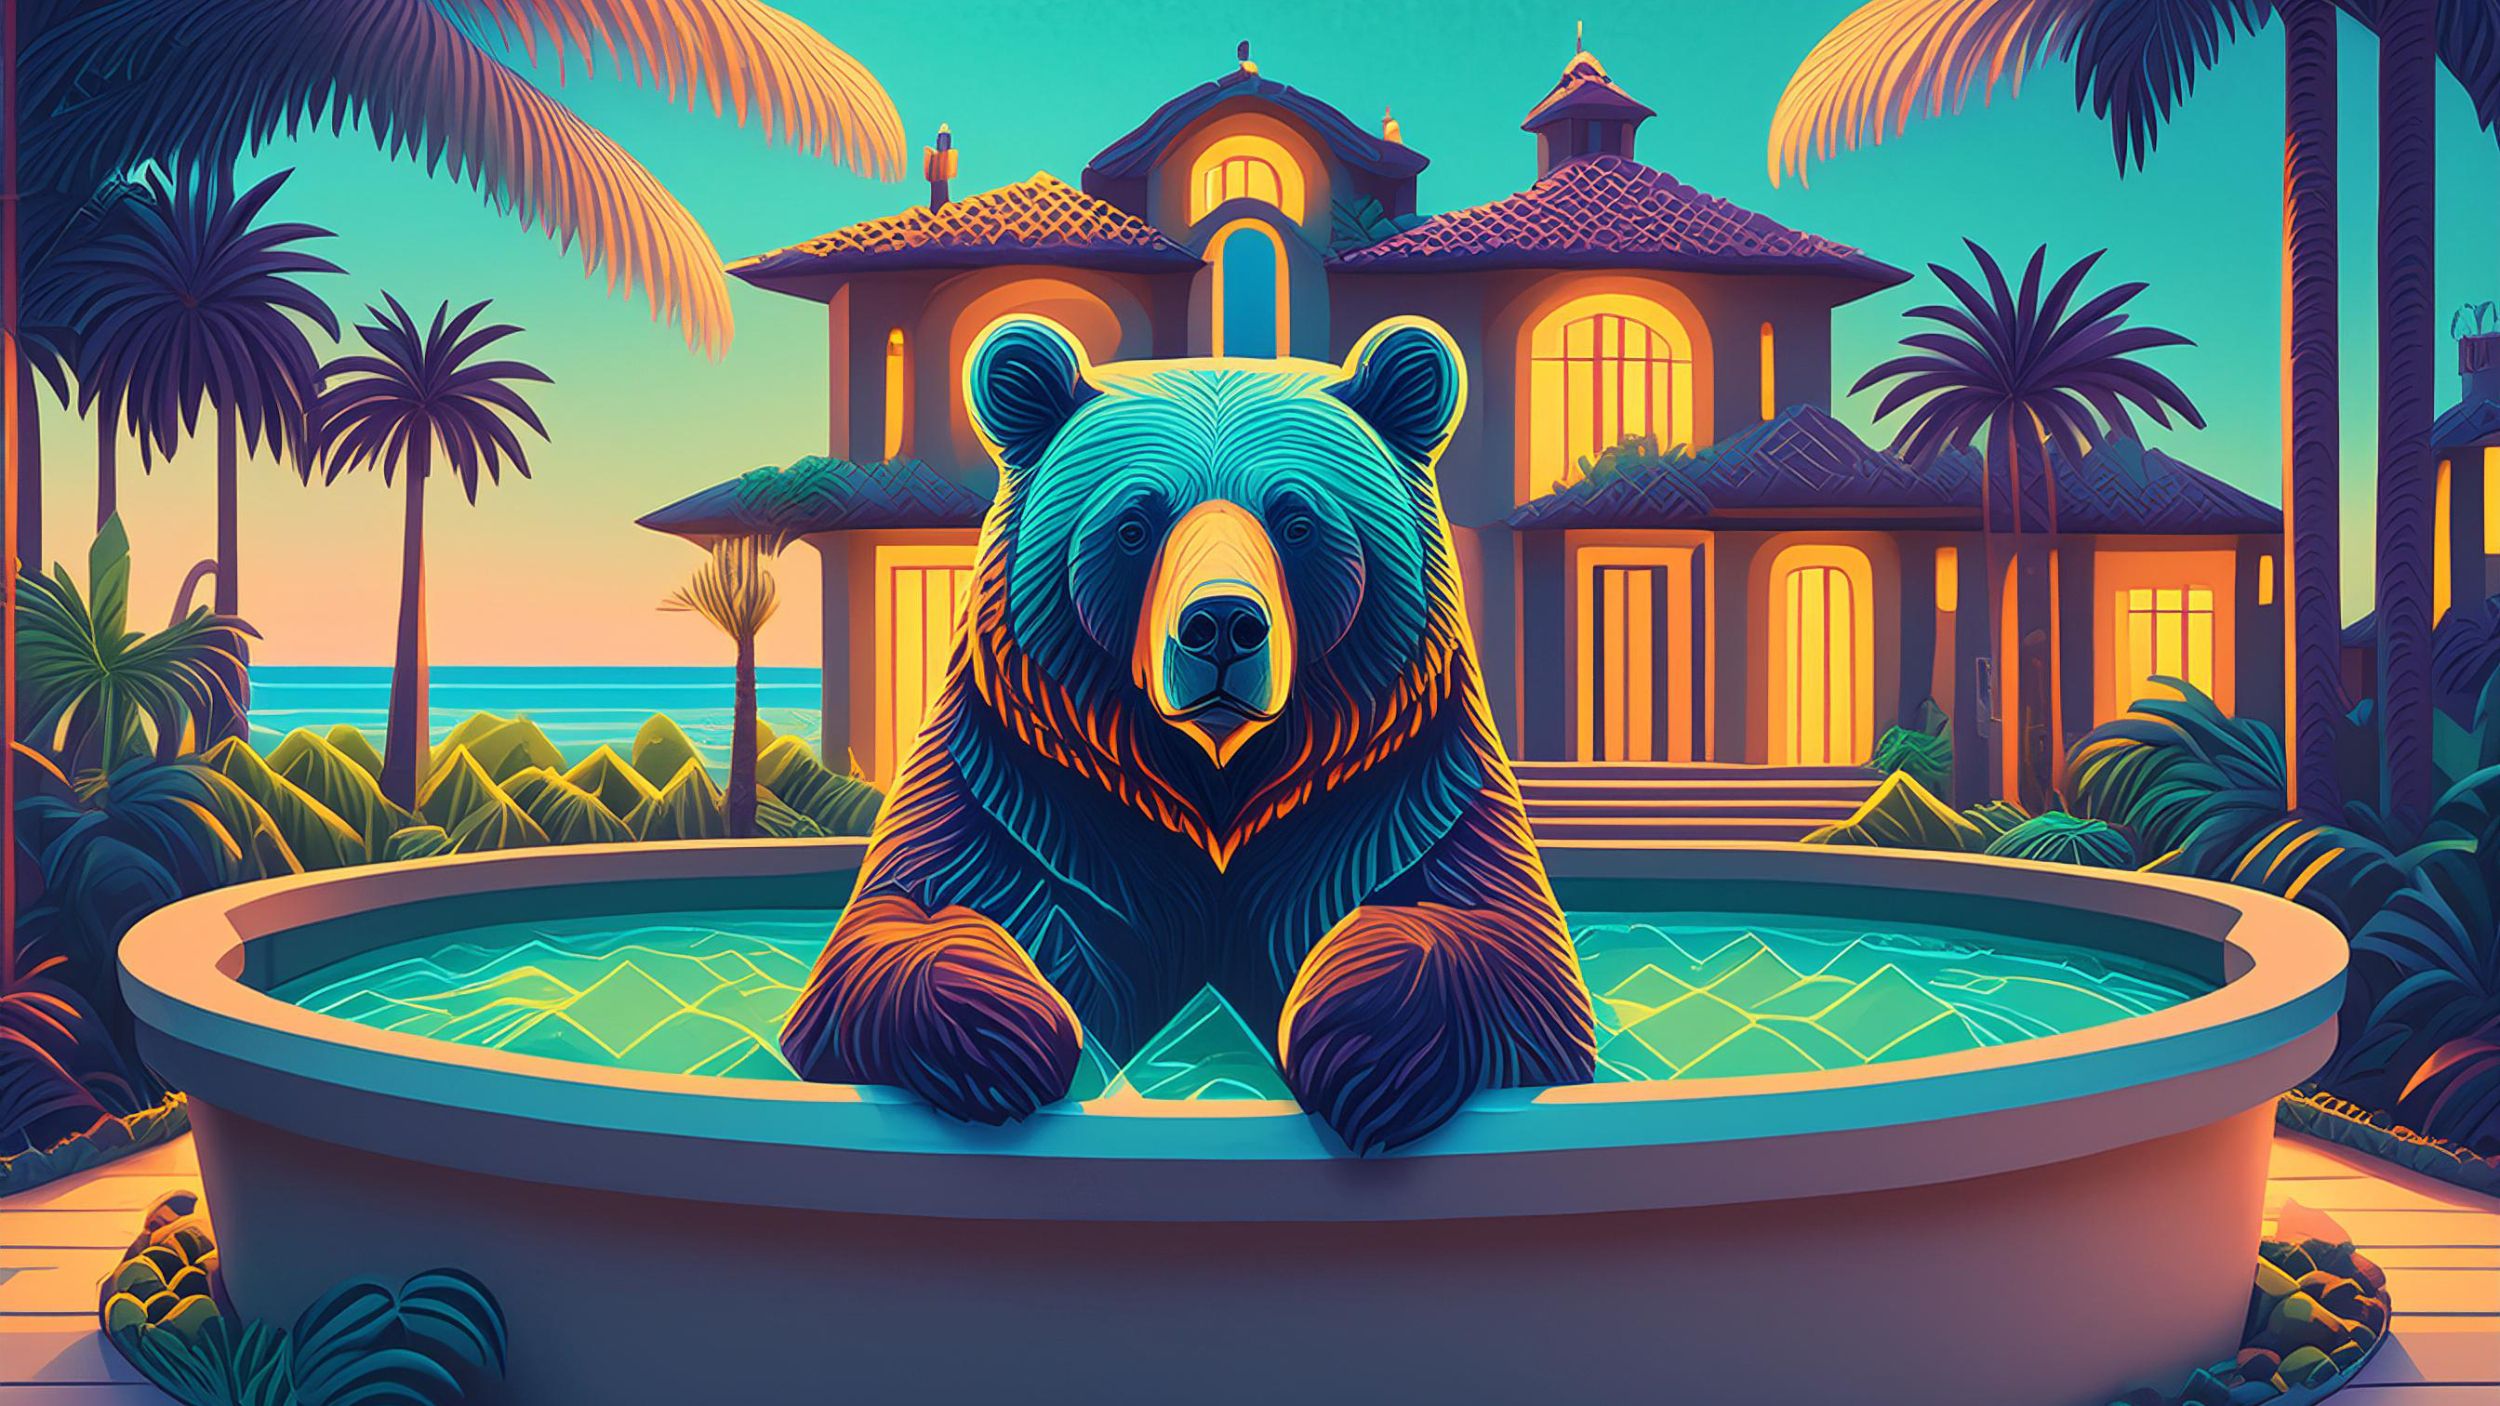 A grizzly bear sits in a hot tub